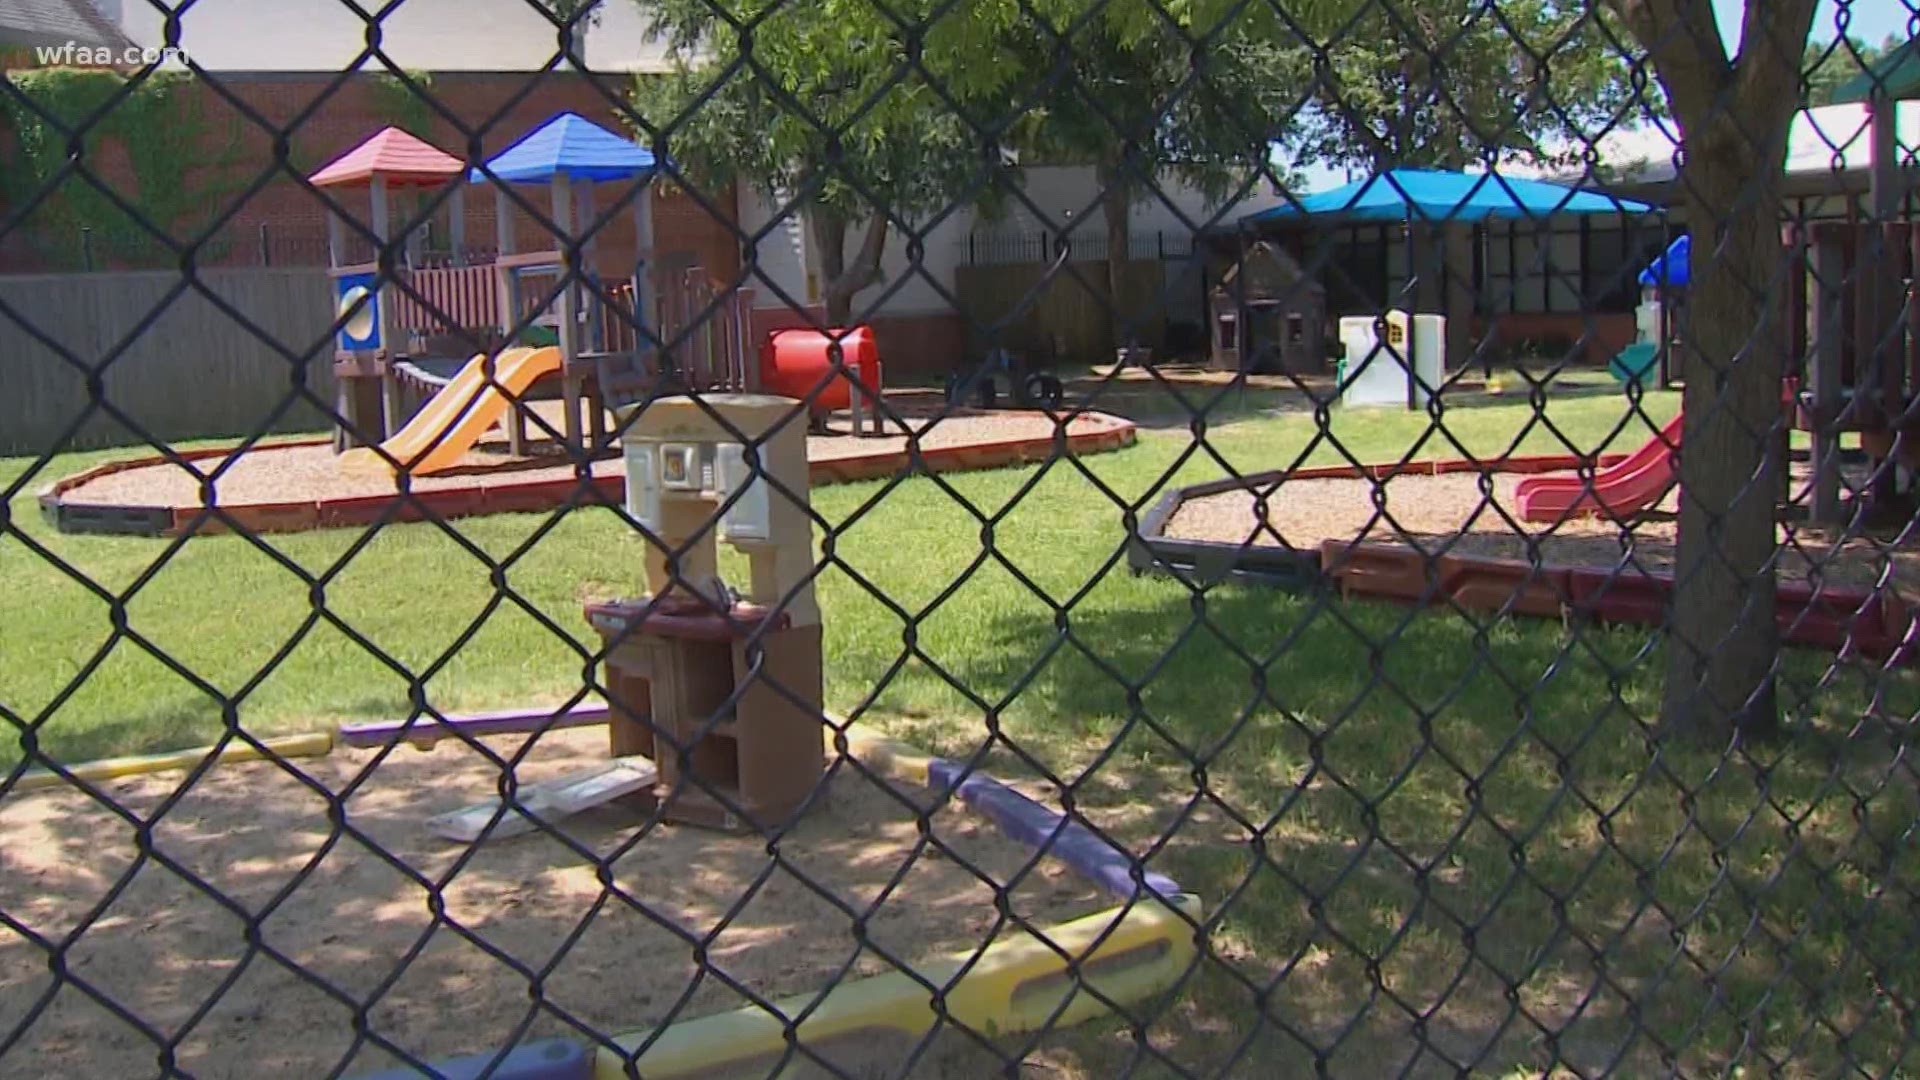 The state has allowed daycare centers to open back up, but the restrictions may end in higher costs to parents.